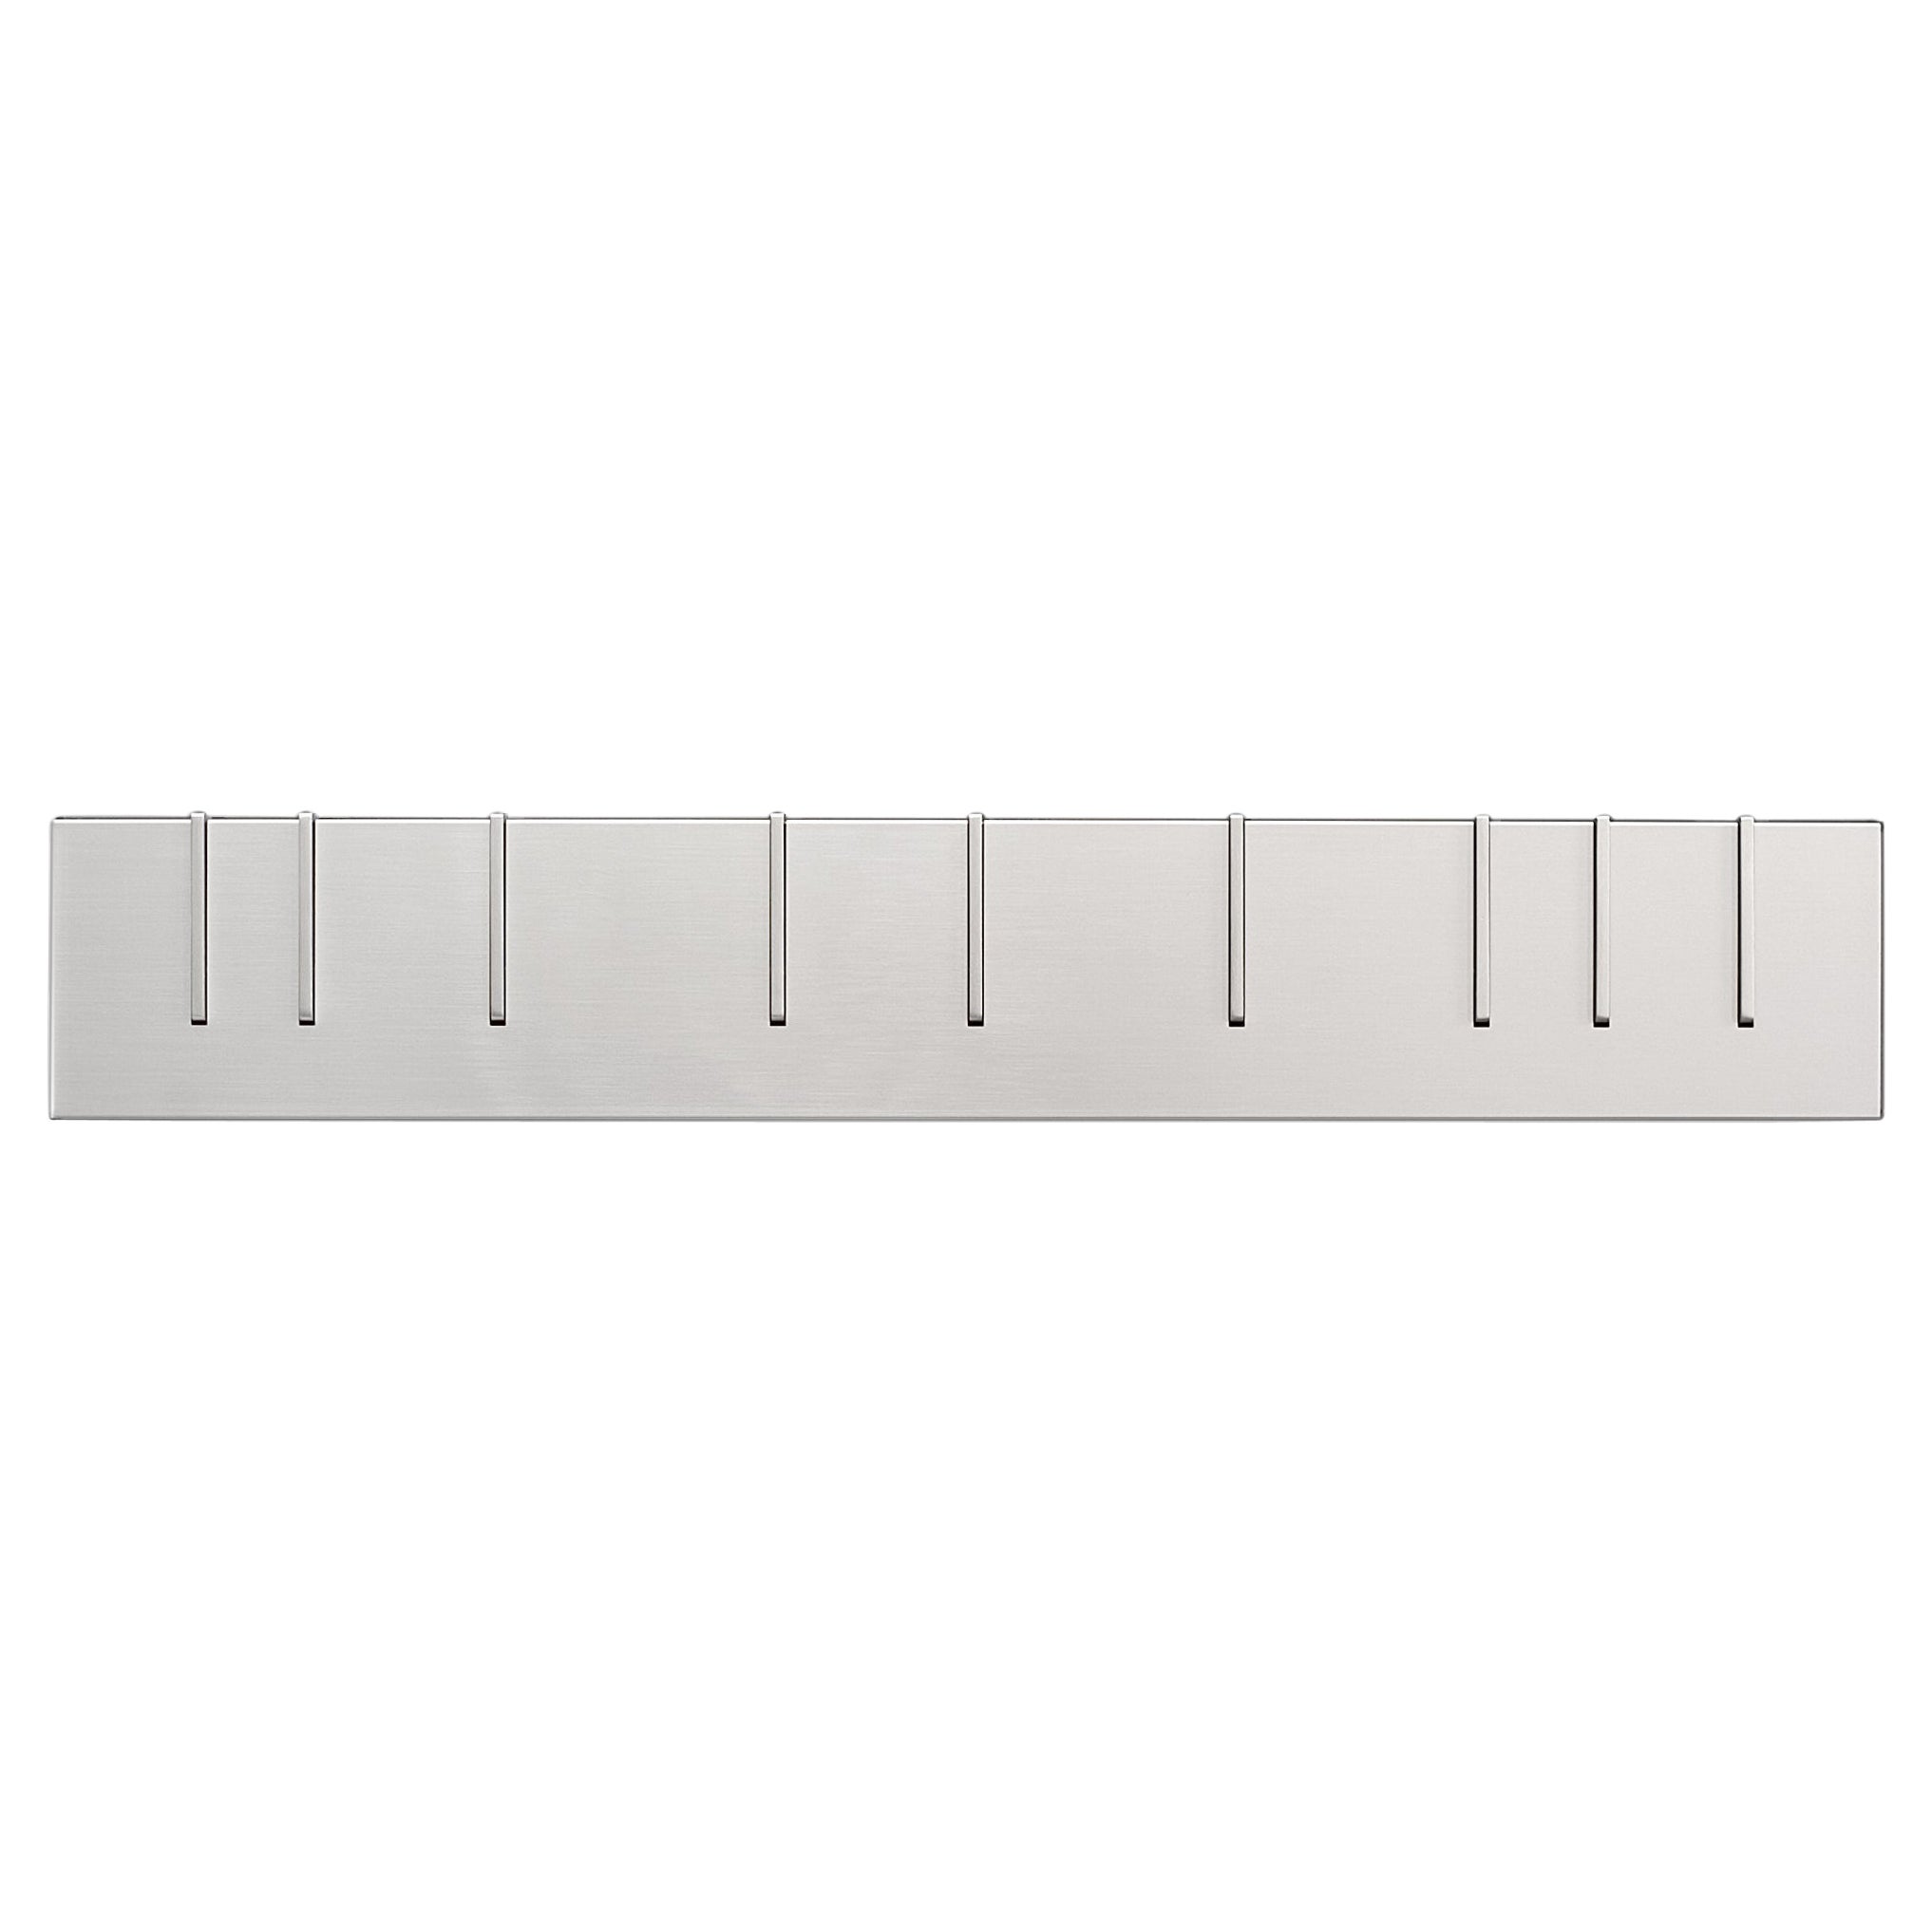 Wall-mounted Symbol Coat Rack in Monochrome For Sale